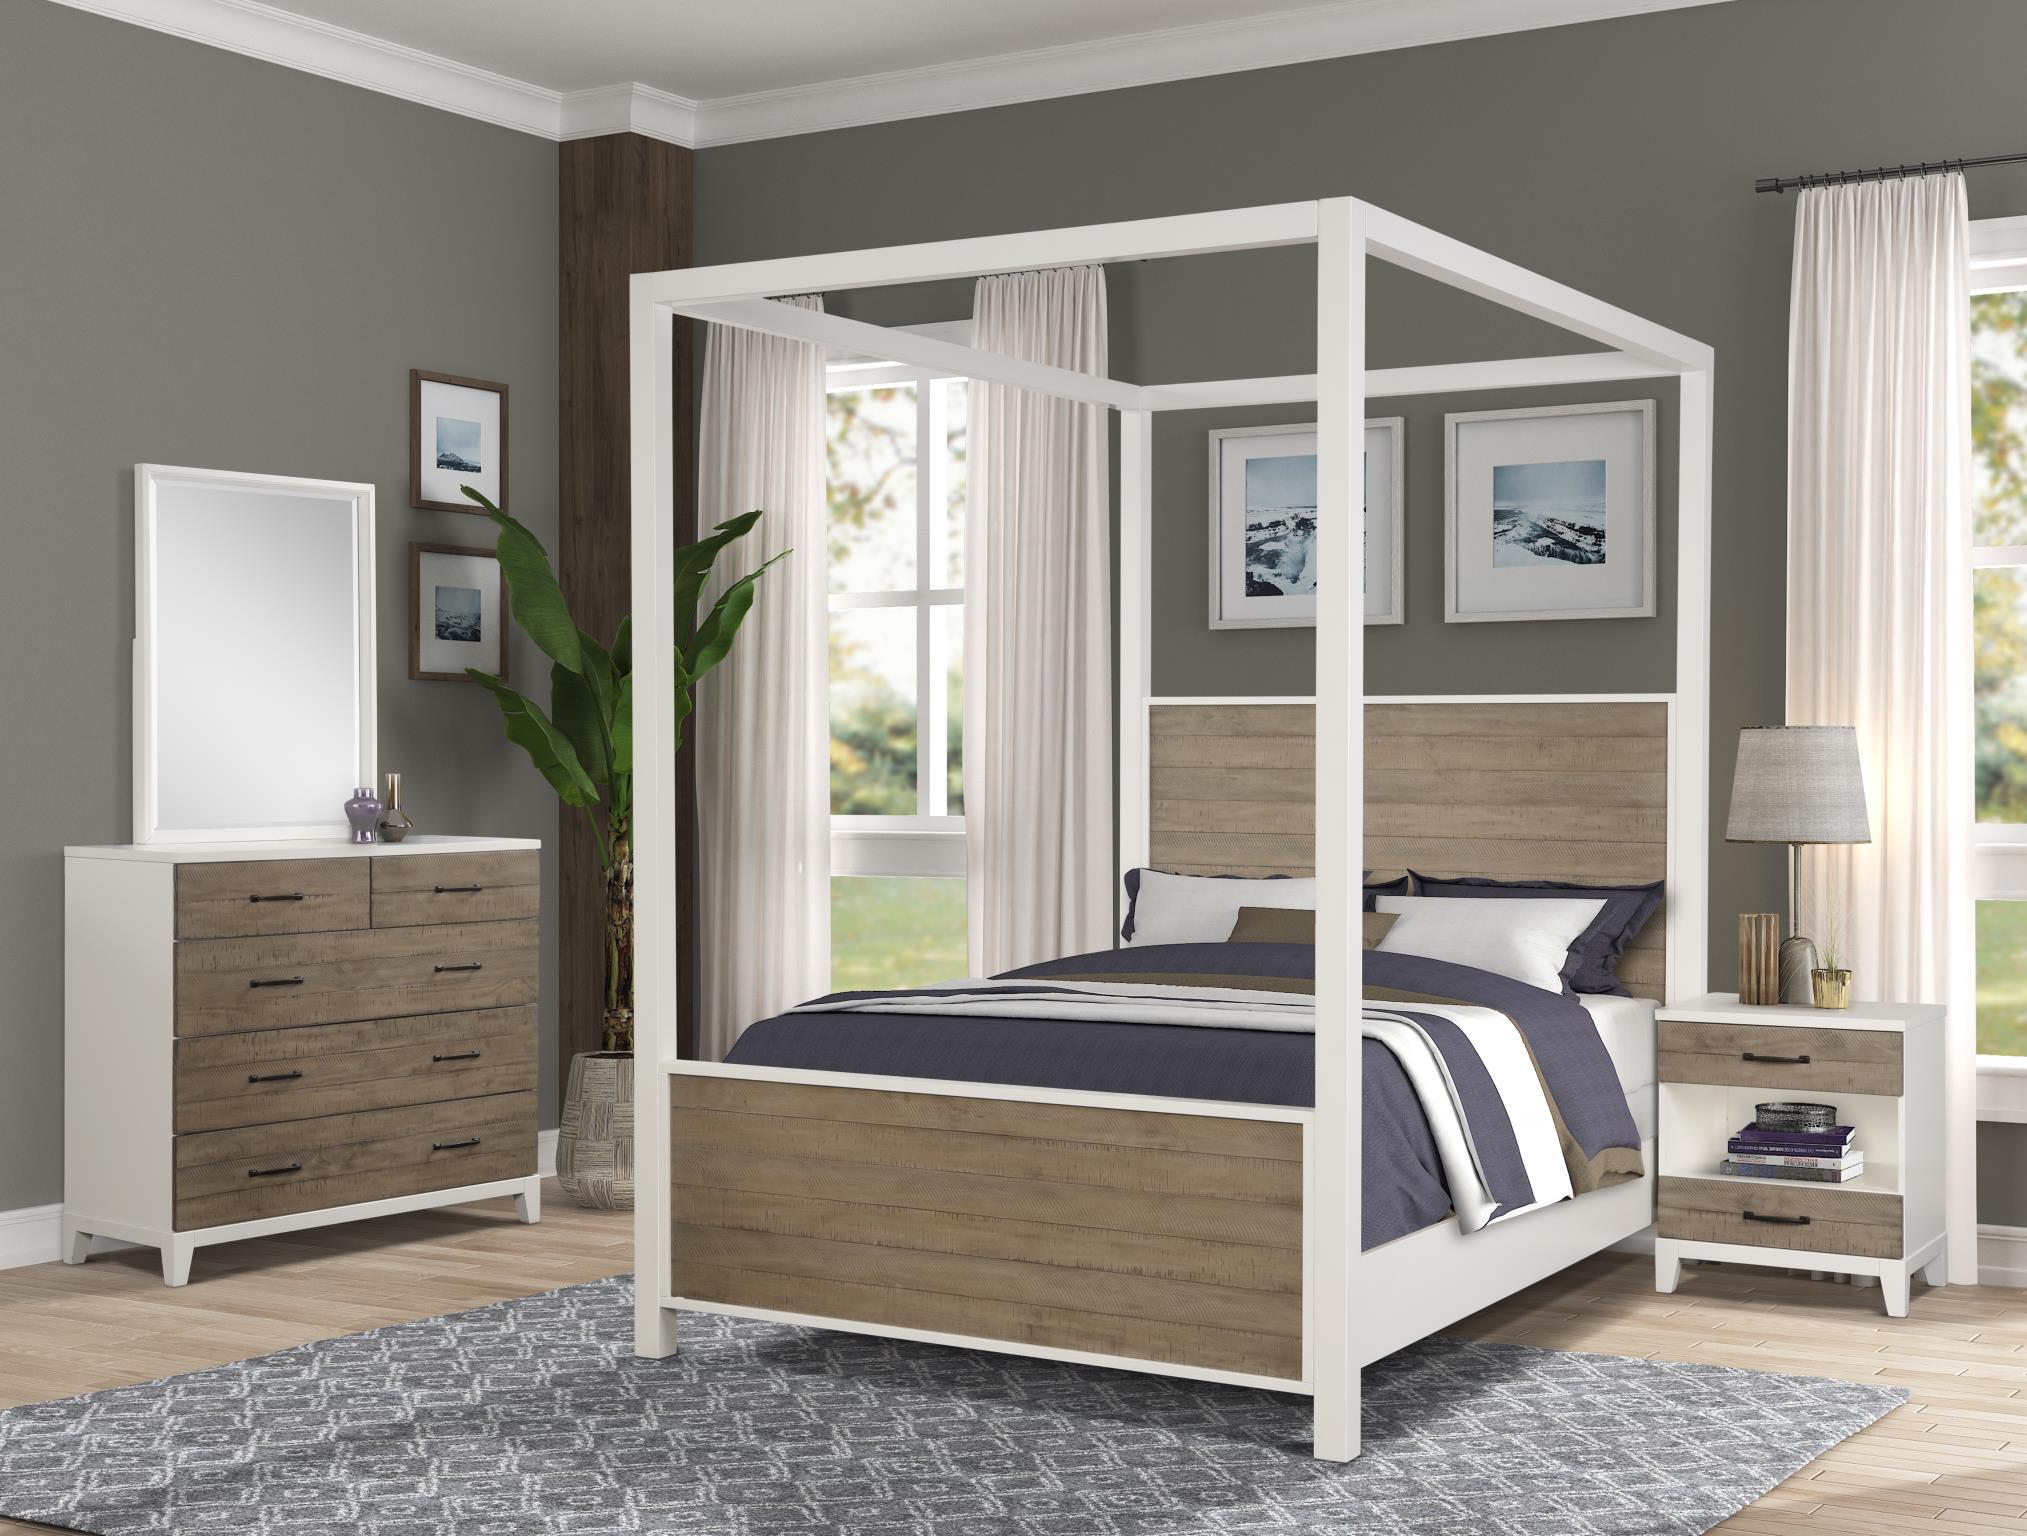 Contemporary, Transitional Bedroom Set Daydreams 1288-108-5pcs in Brown Oak 